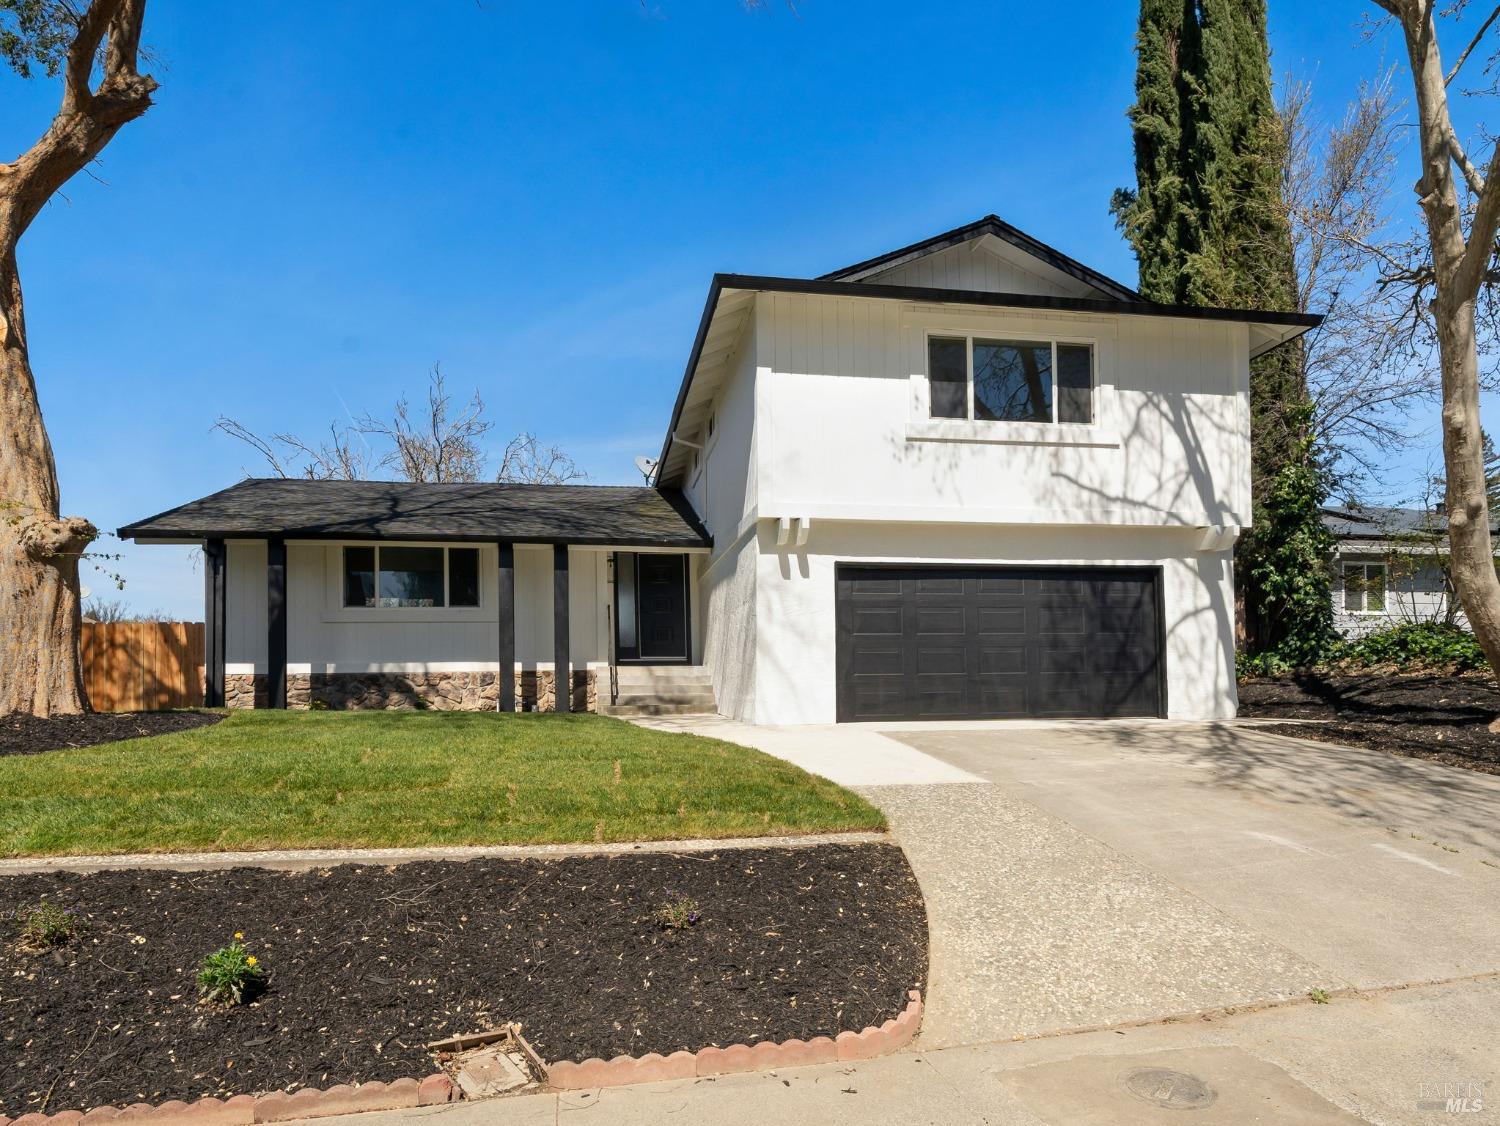 Photo of 469 Marbella Ln in Vacaville, CA